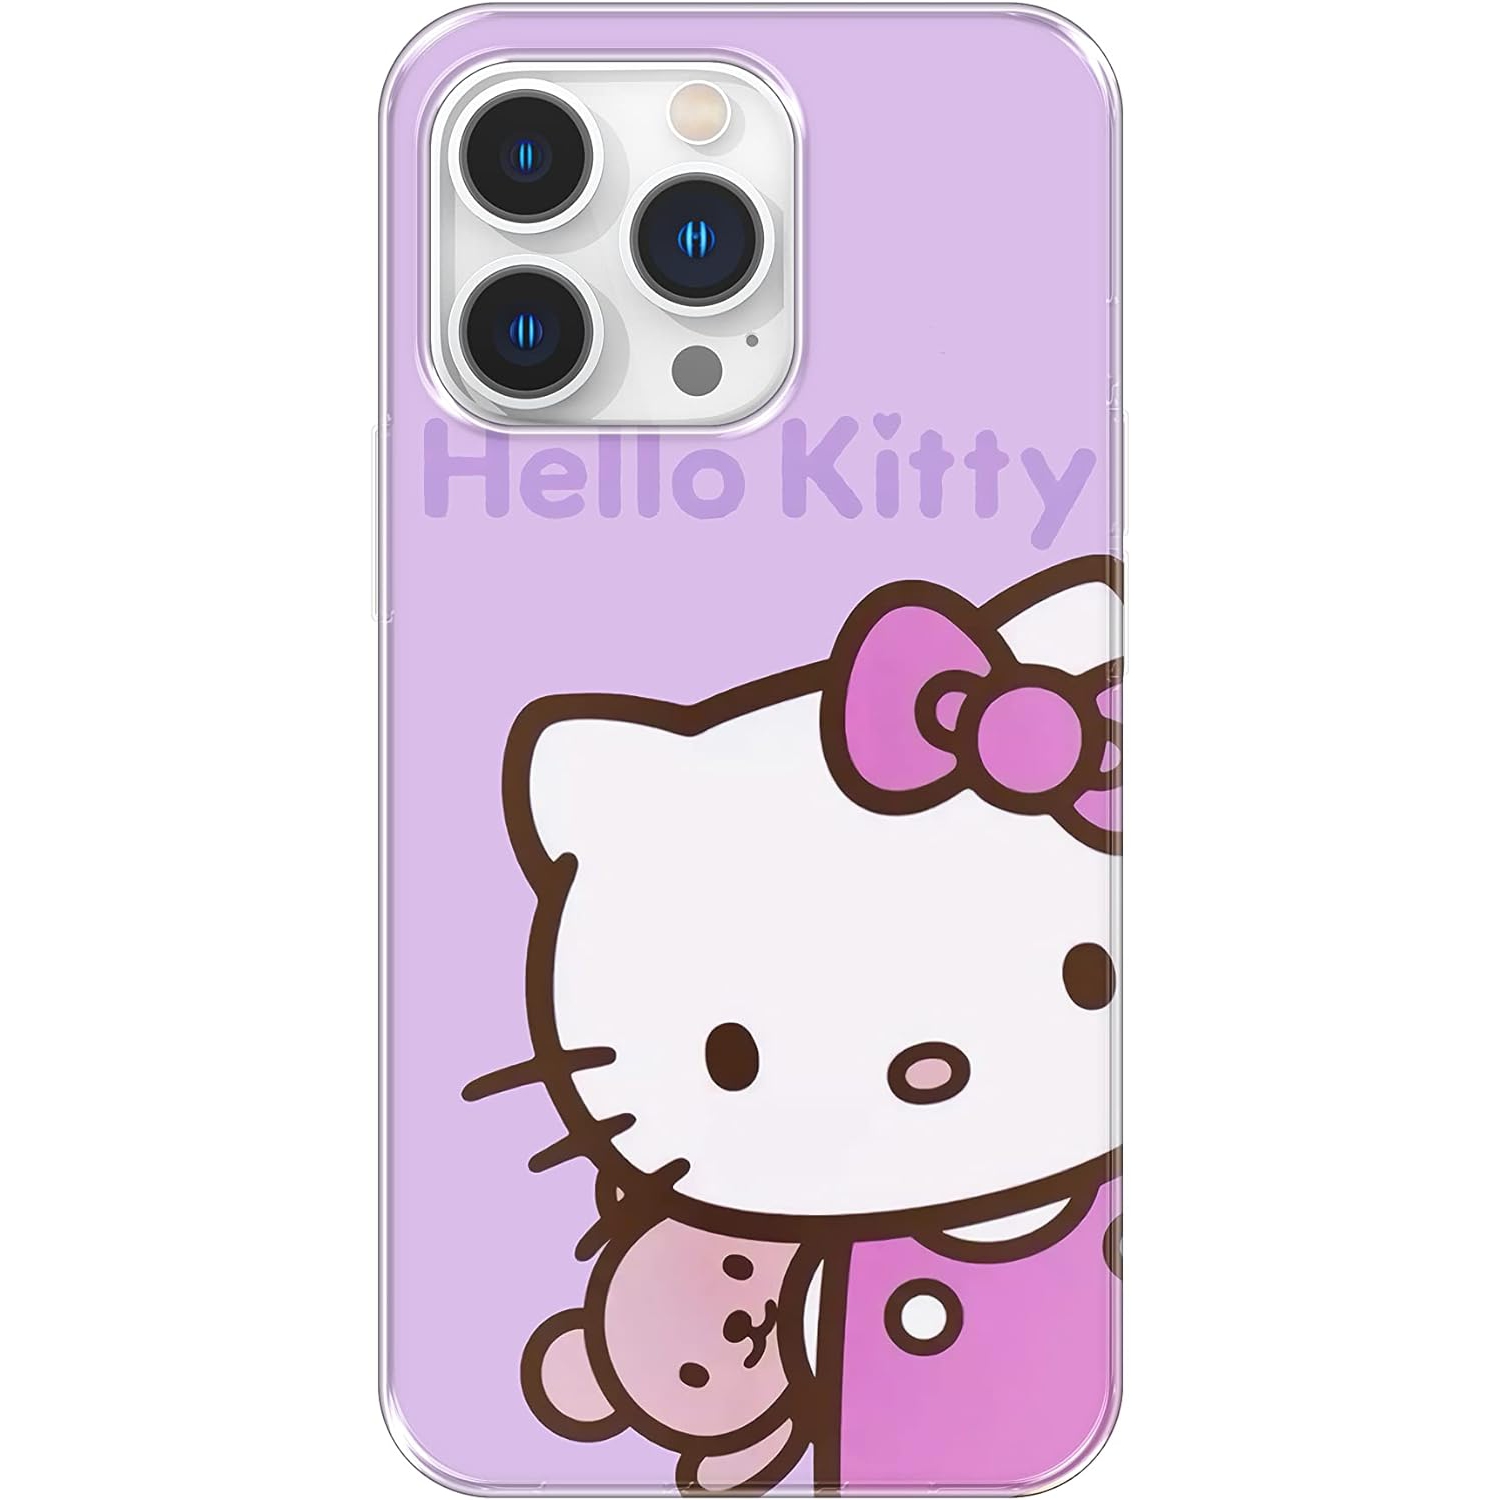 iPhone Case Compatible with iPhone 14 Pro Max Case, Hello Kitty iPhone 14 Hello Kitty Anime iPhone 14 Pro Max